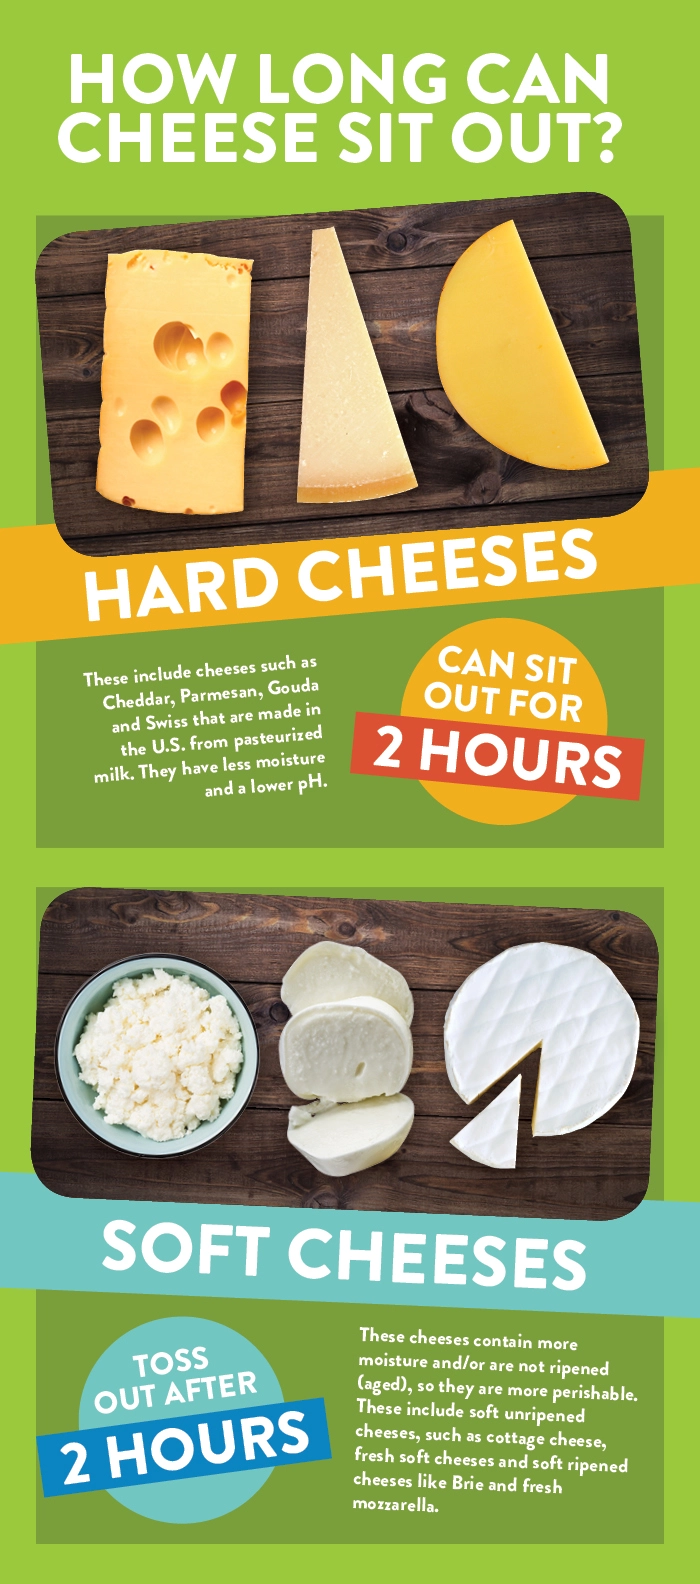 How Long Can Parmesan Cheese Sit Out?